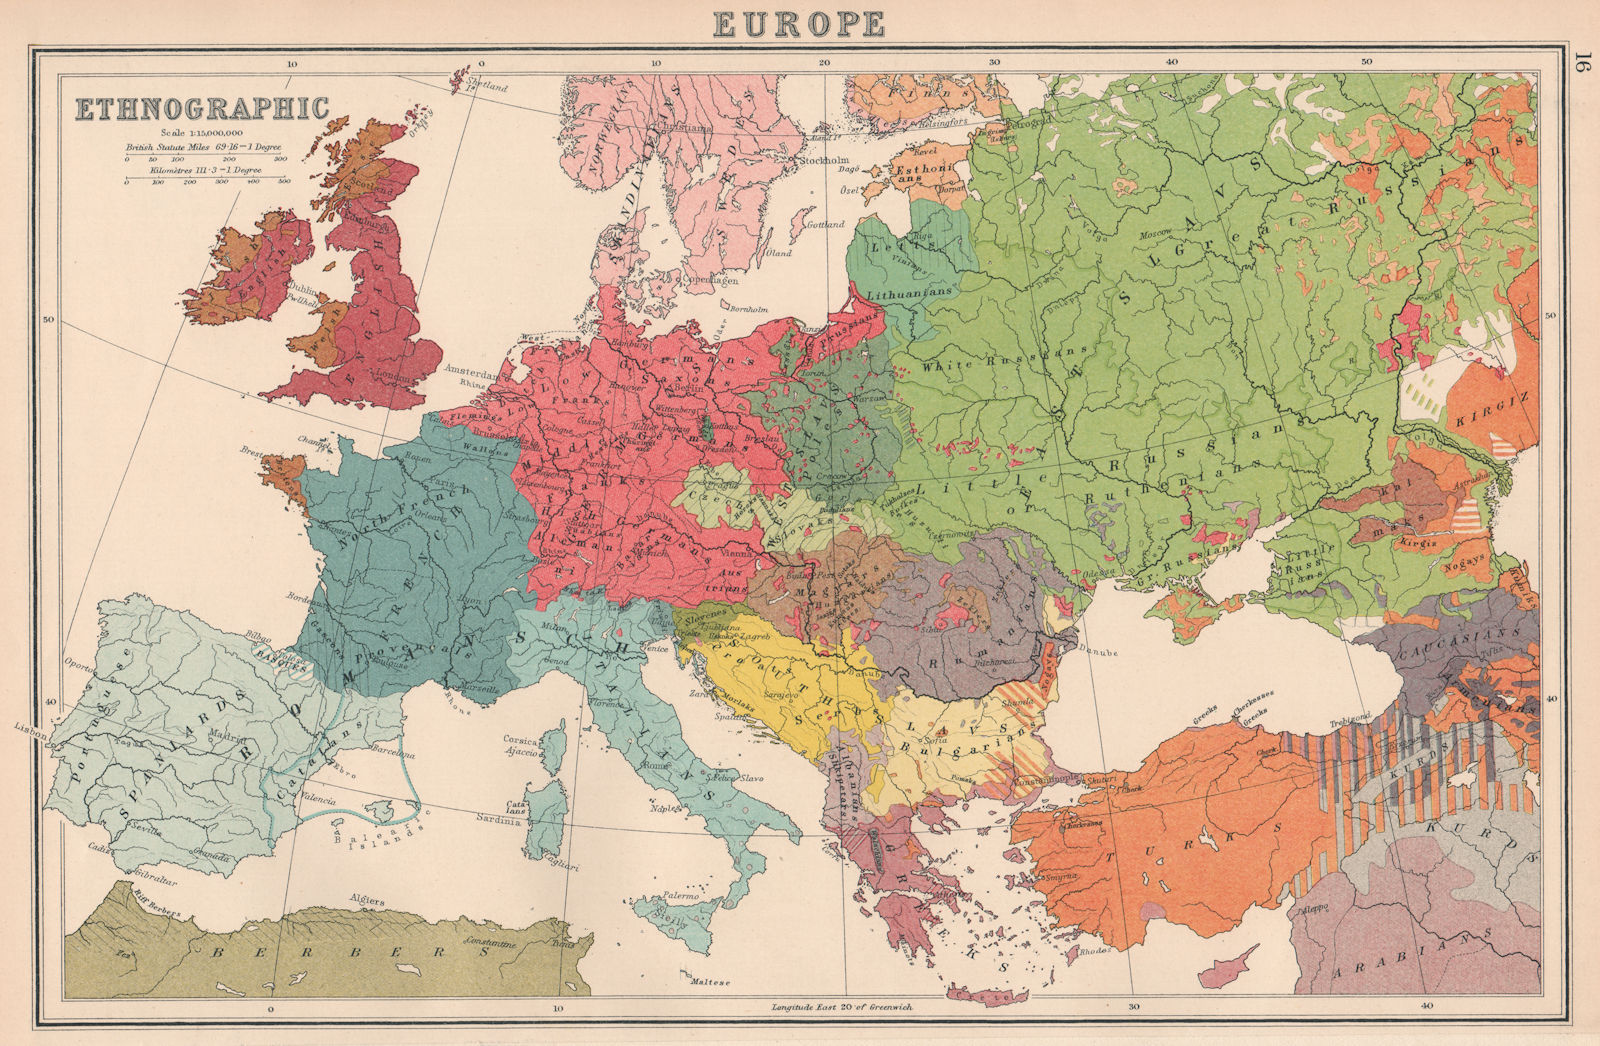 Associate Product EUROPE ETHNOGRAPHIC. Races Racial. BARTHOLOMEW 1924 old vintage map plan chart